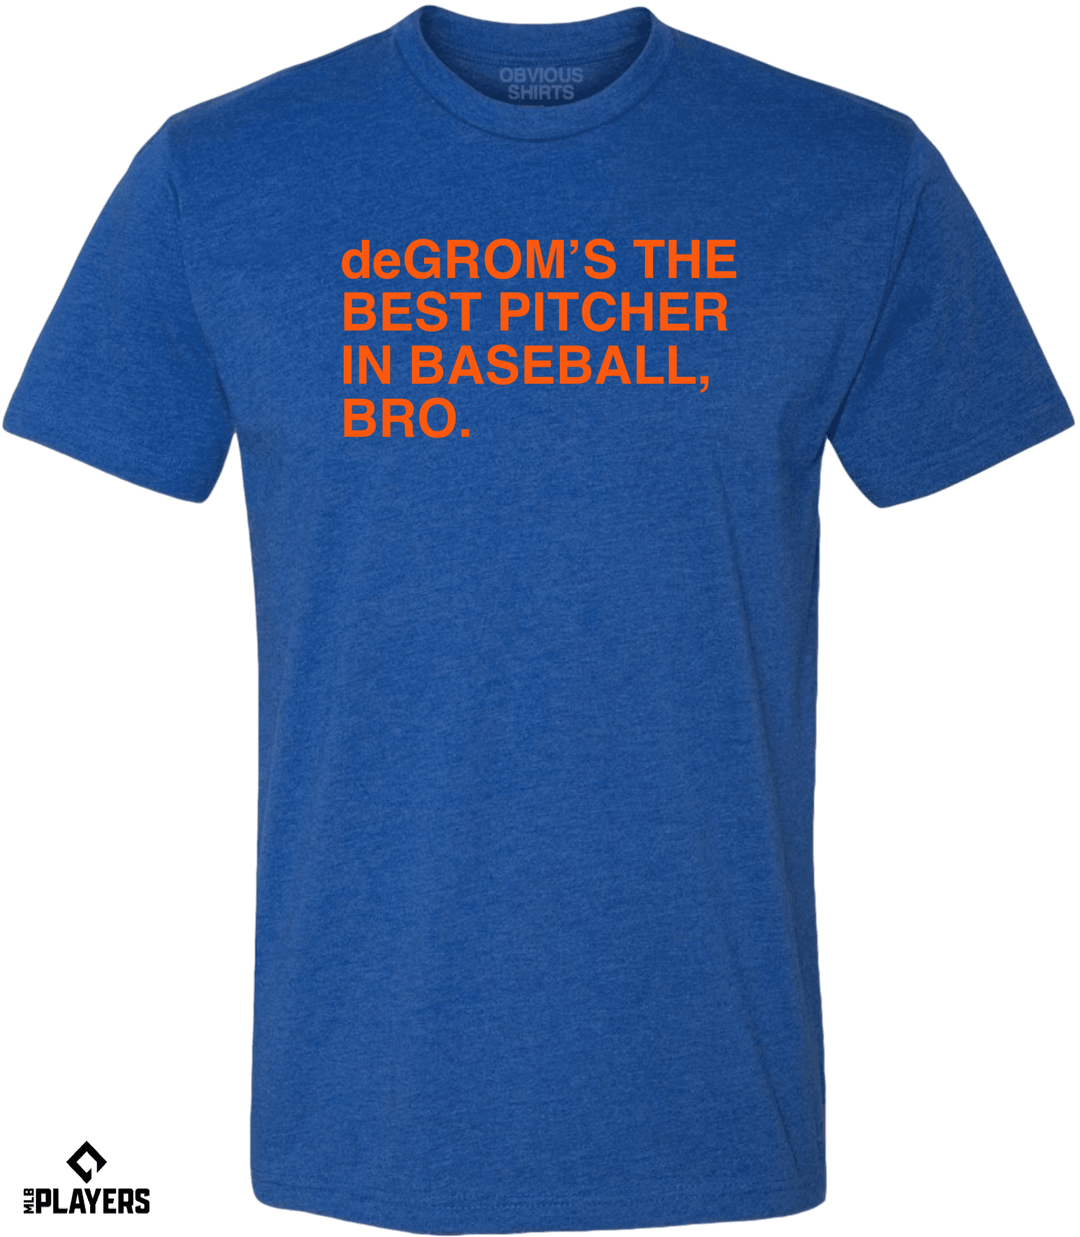 deGROM’S THE BEST PITCHER IN BASEBALL, BRO. - OBVIOUS SHIRTS.